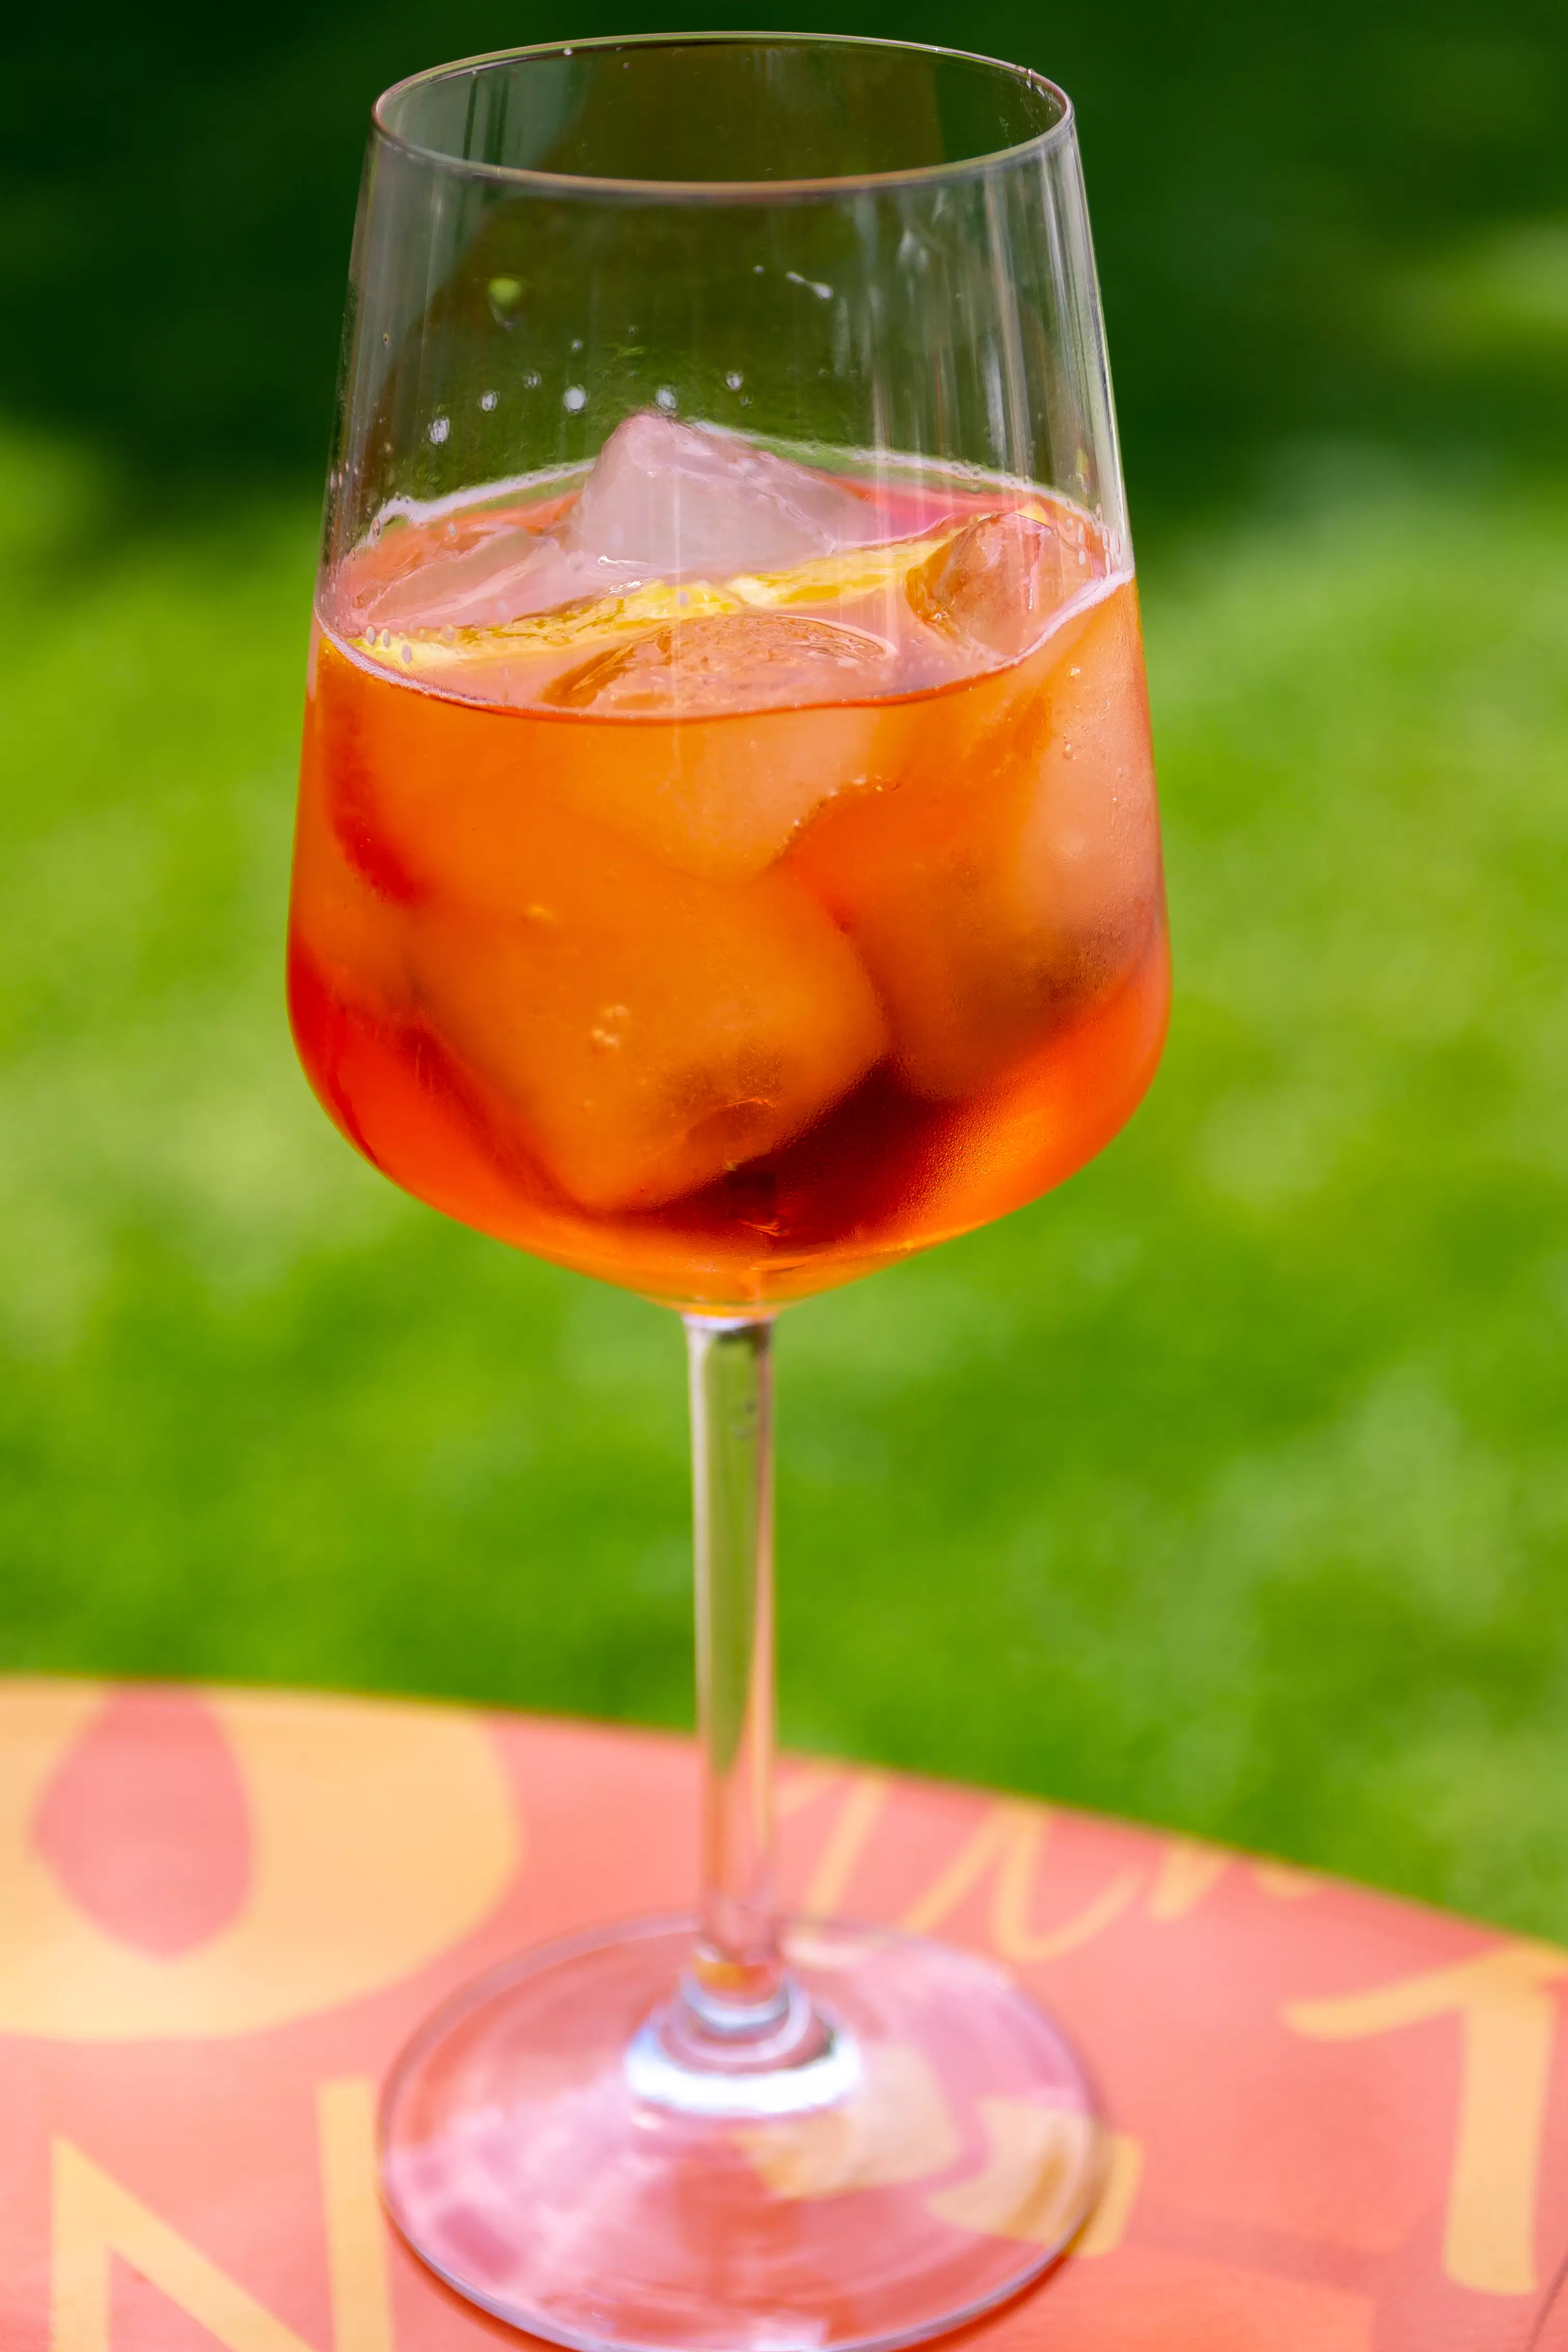 We'll be cracking open the Aperol (